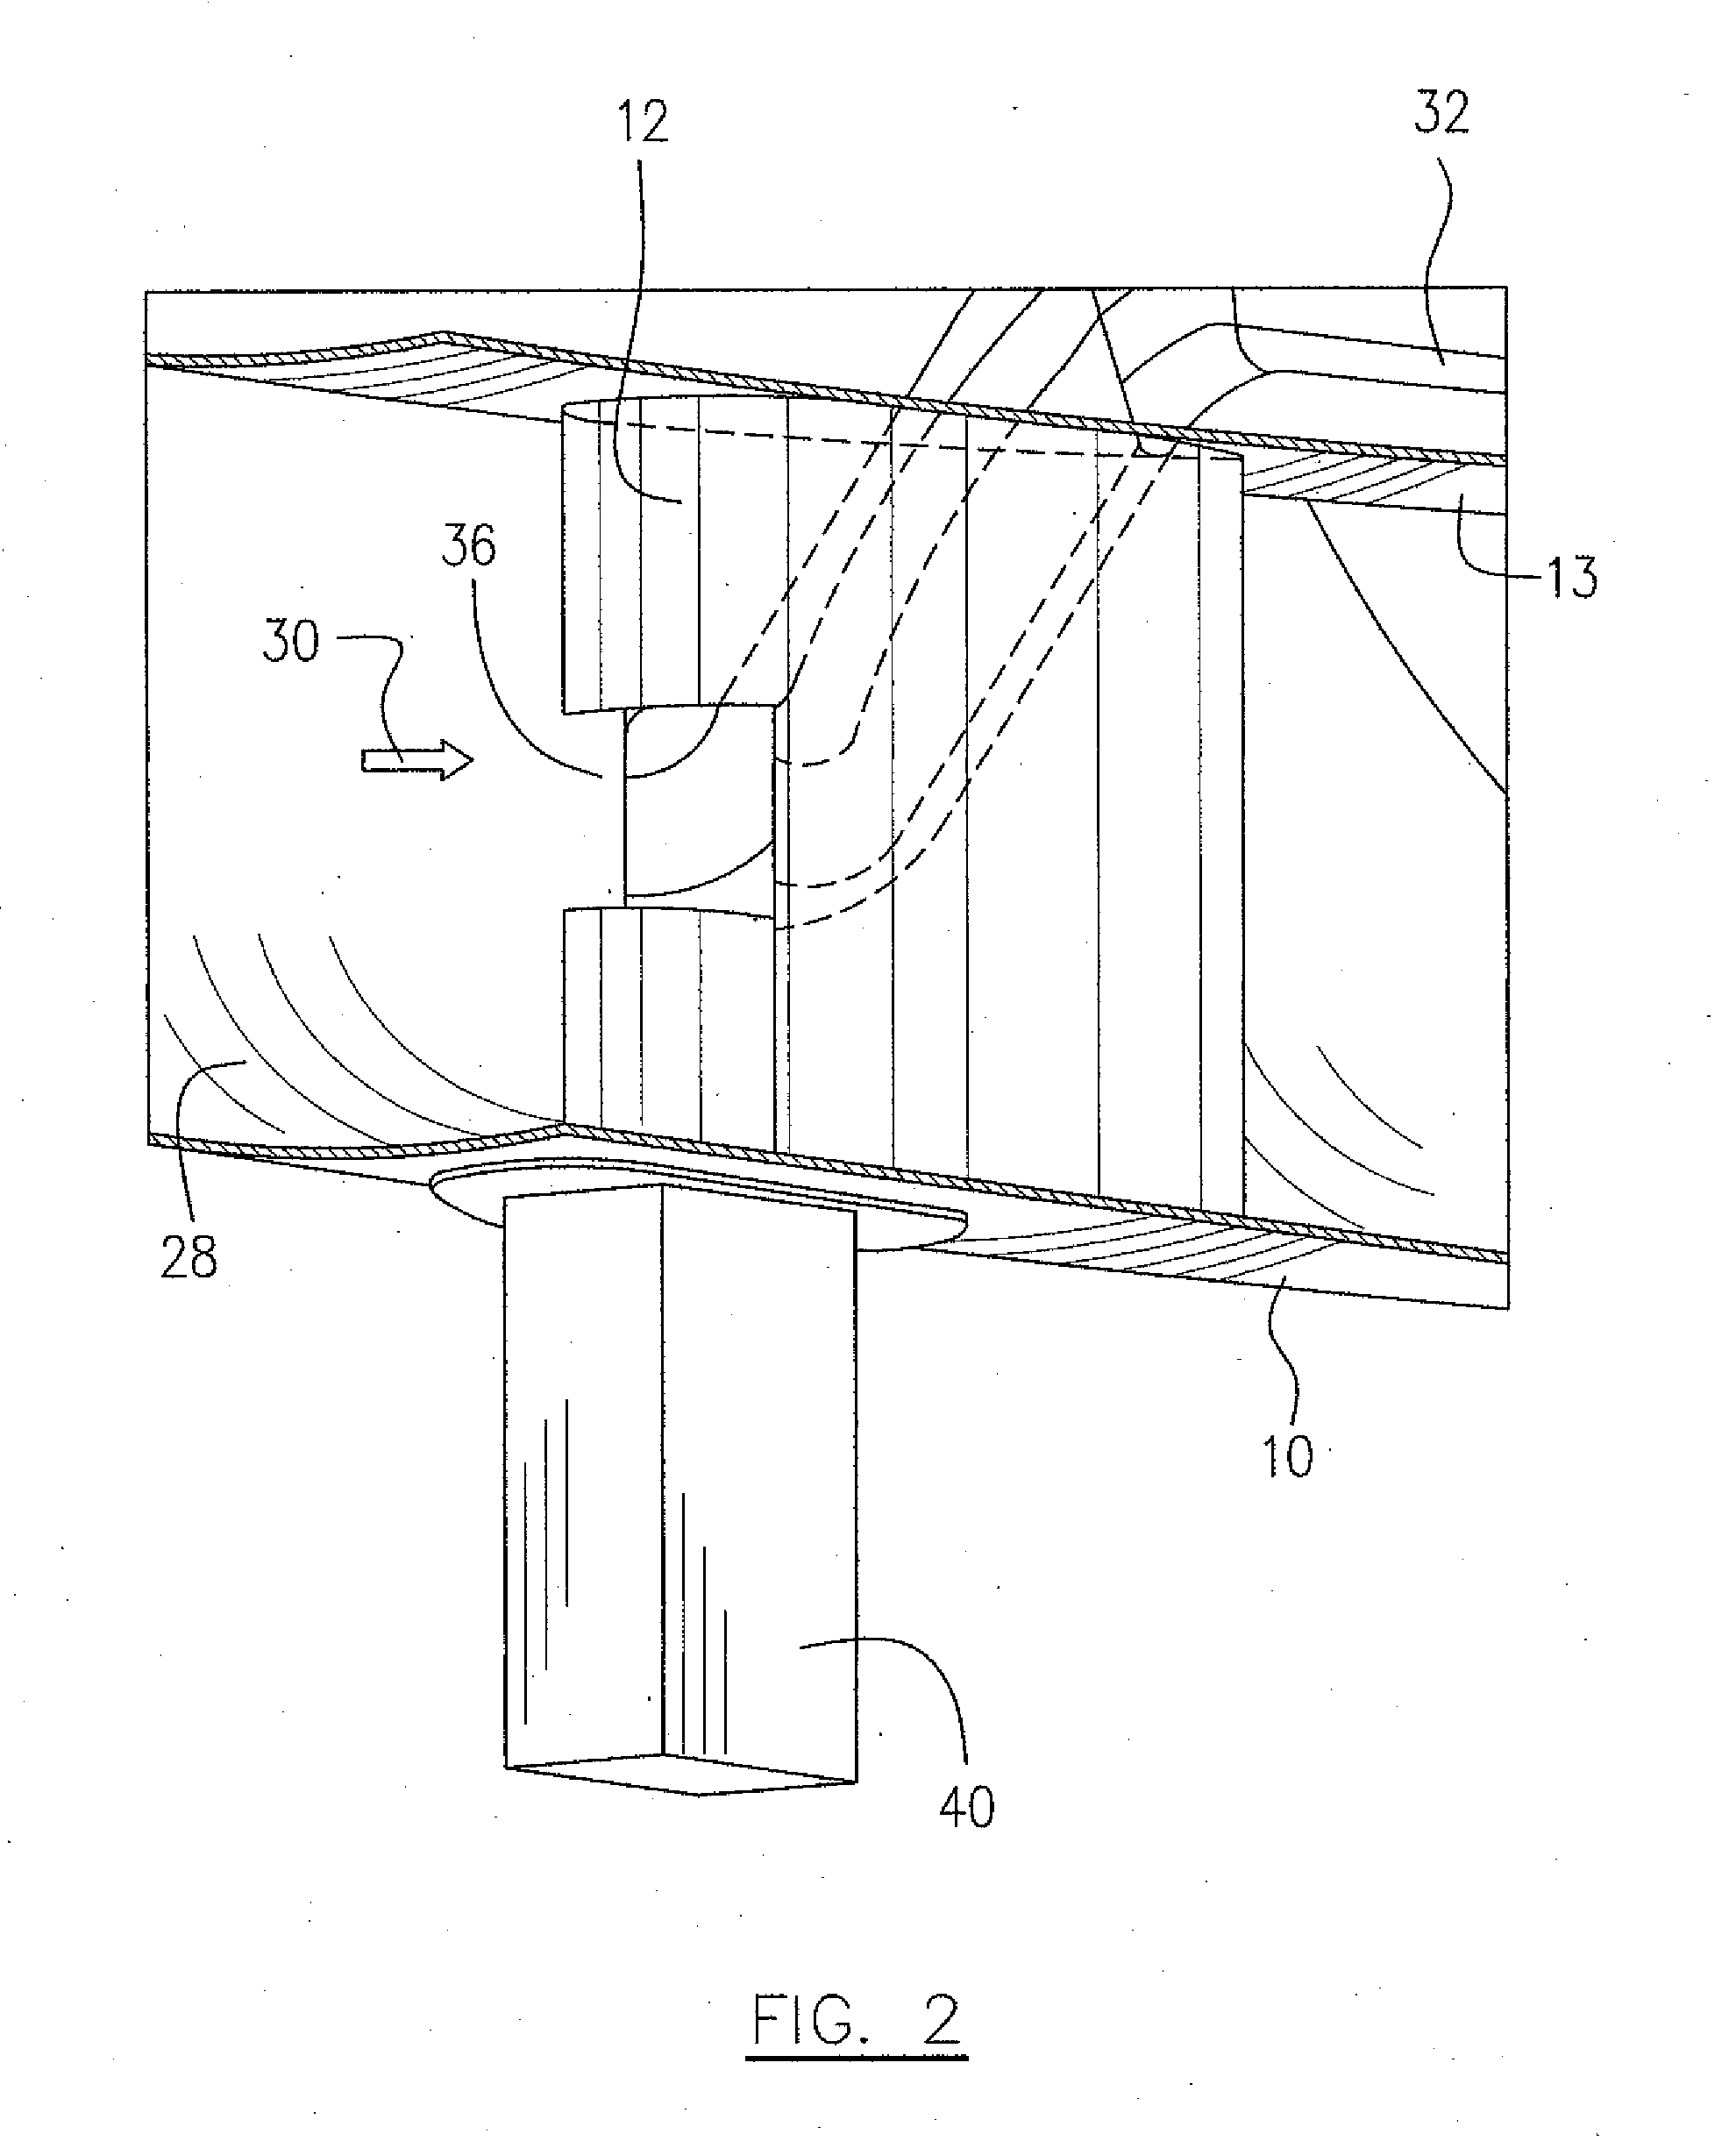 Bypass air scoop for gas turbine engine